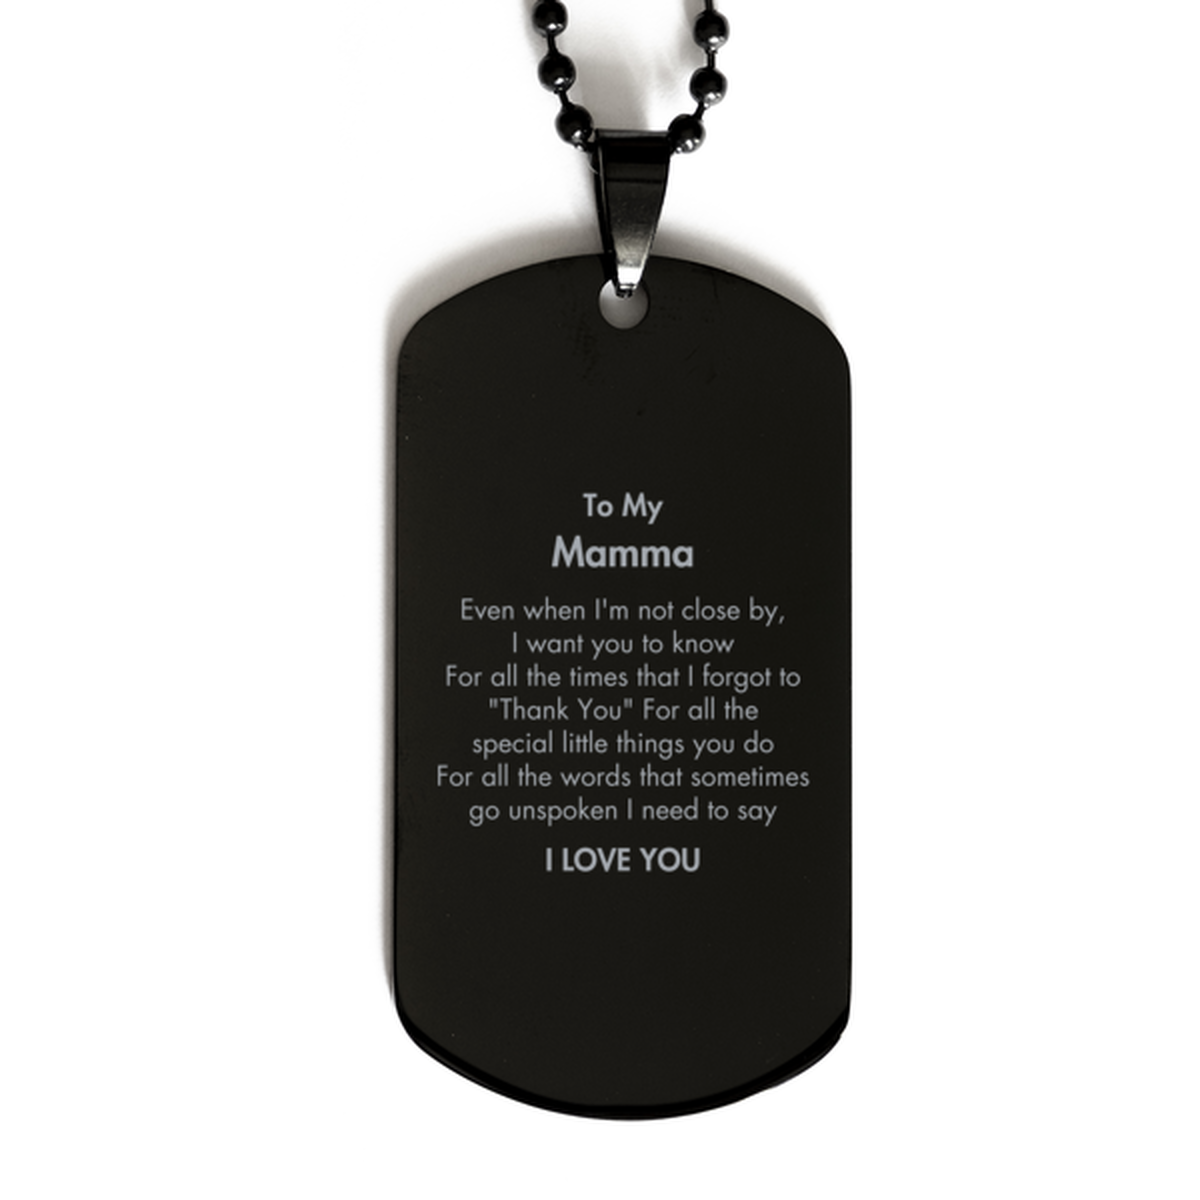 Thank You Gifts for Mamma, Keepsake Black Dog Tag Gifts for Mamma Birthday Mother's day Father's Day Mamma For all the words That sometimes go unspoken I need to say I LOVE YOU